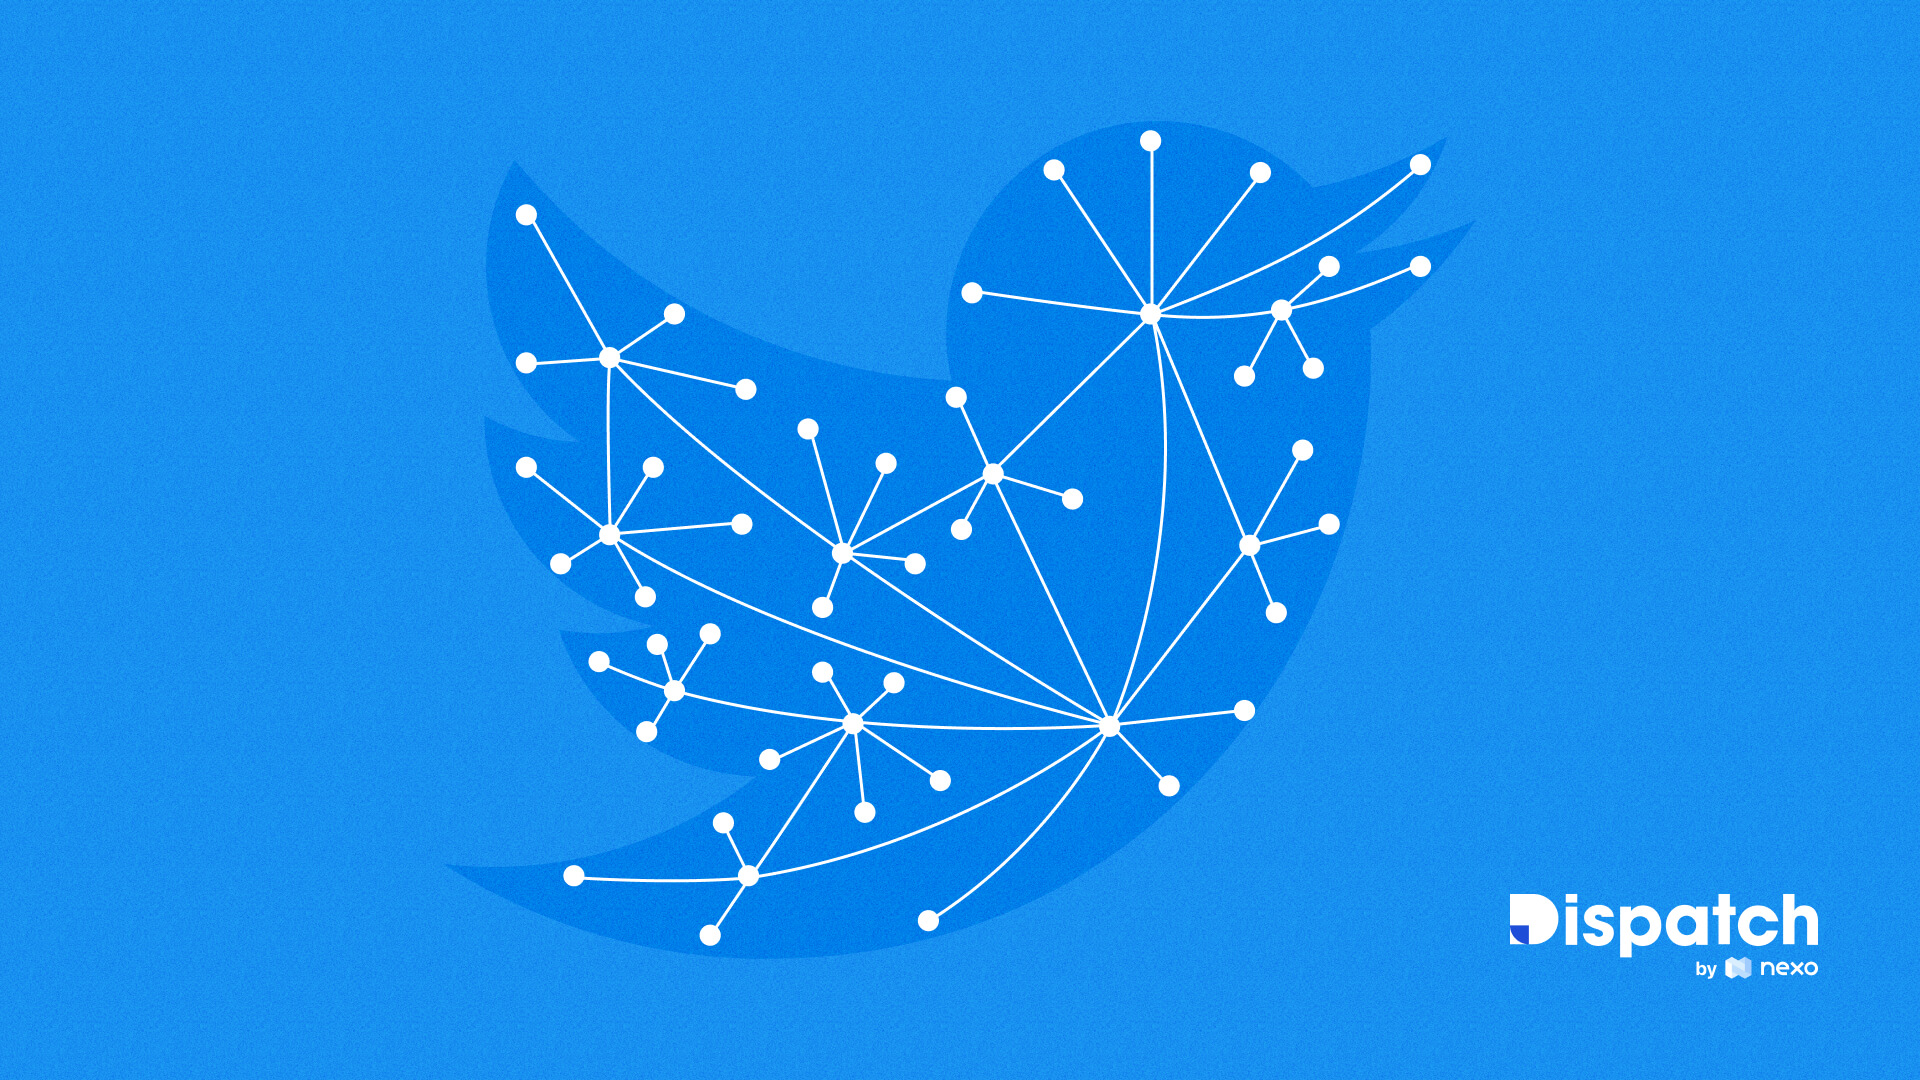 Dispatch #49: Twitter Digs in on Decentralized Social Media